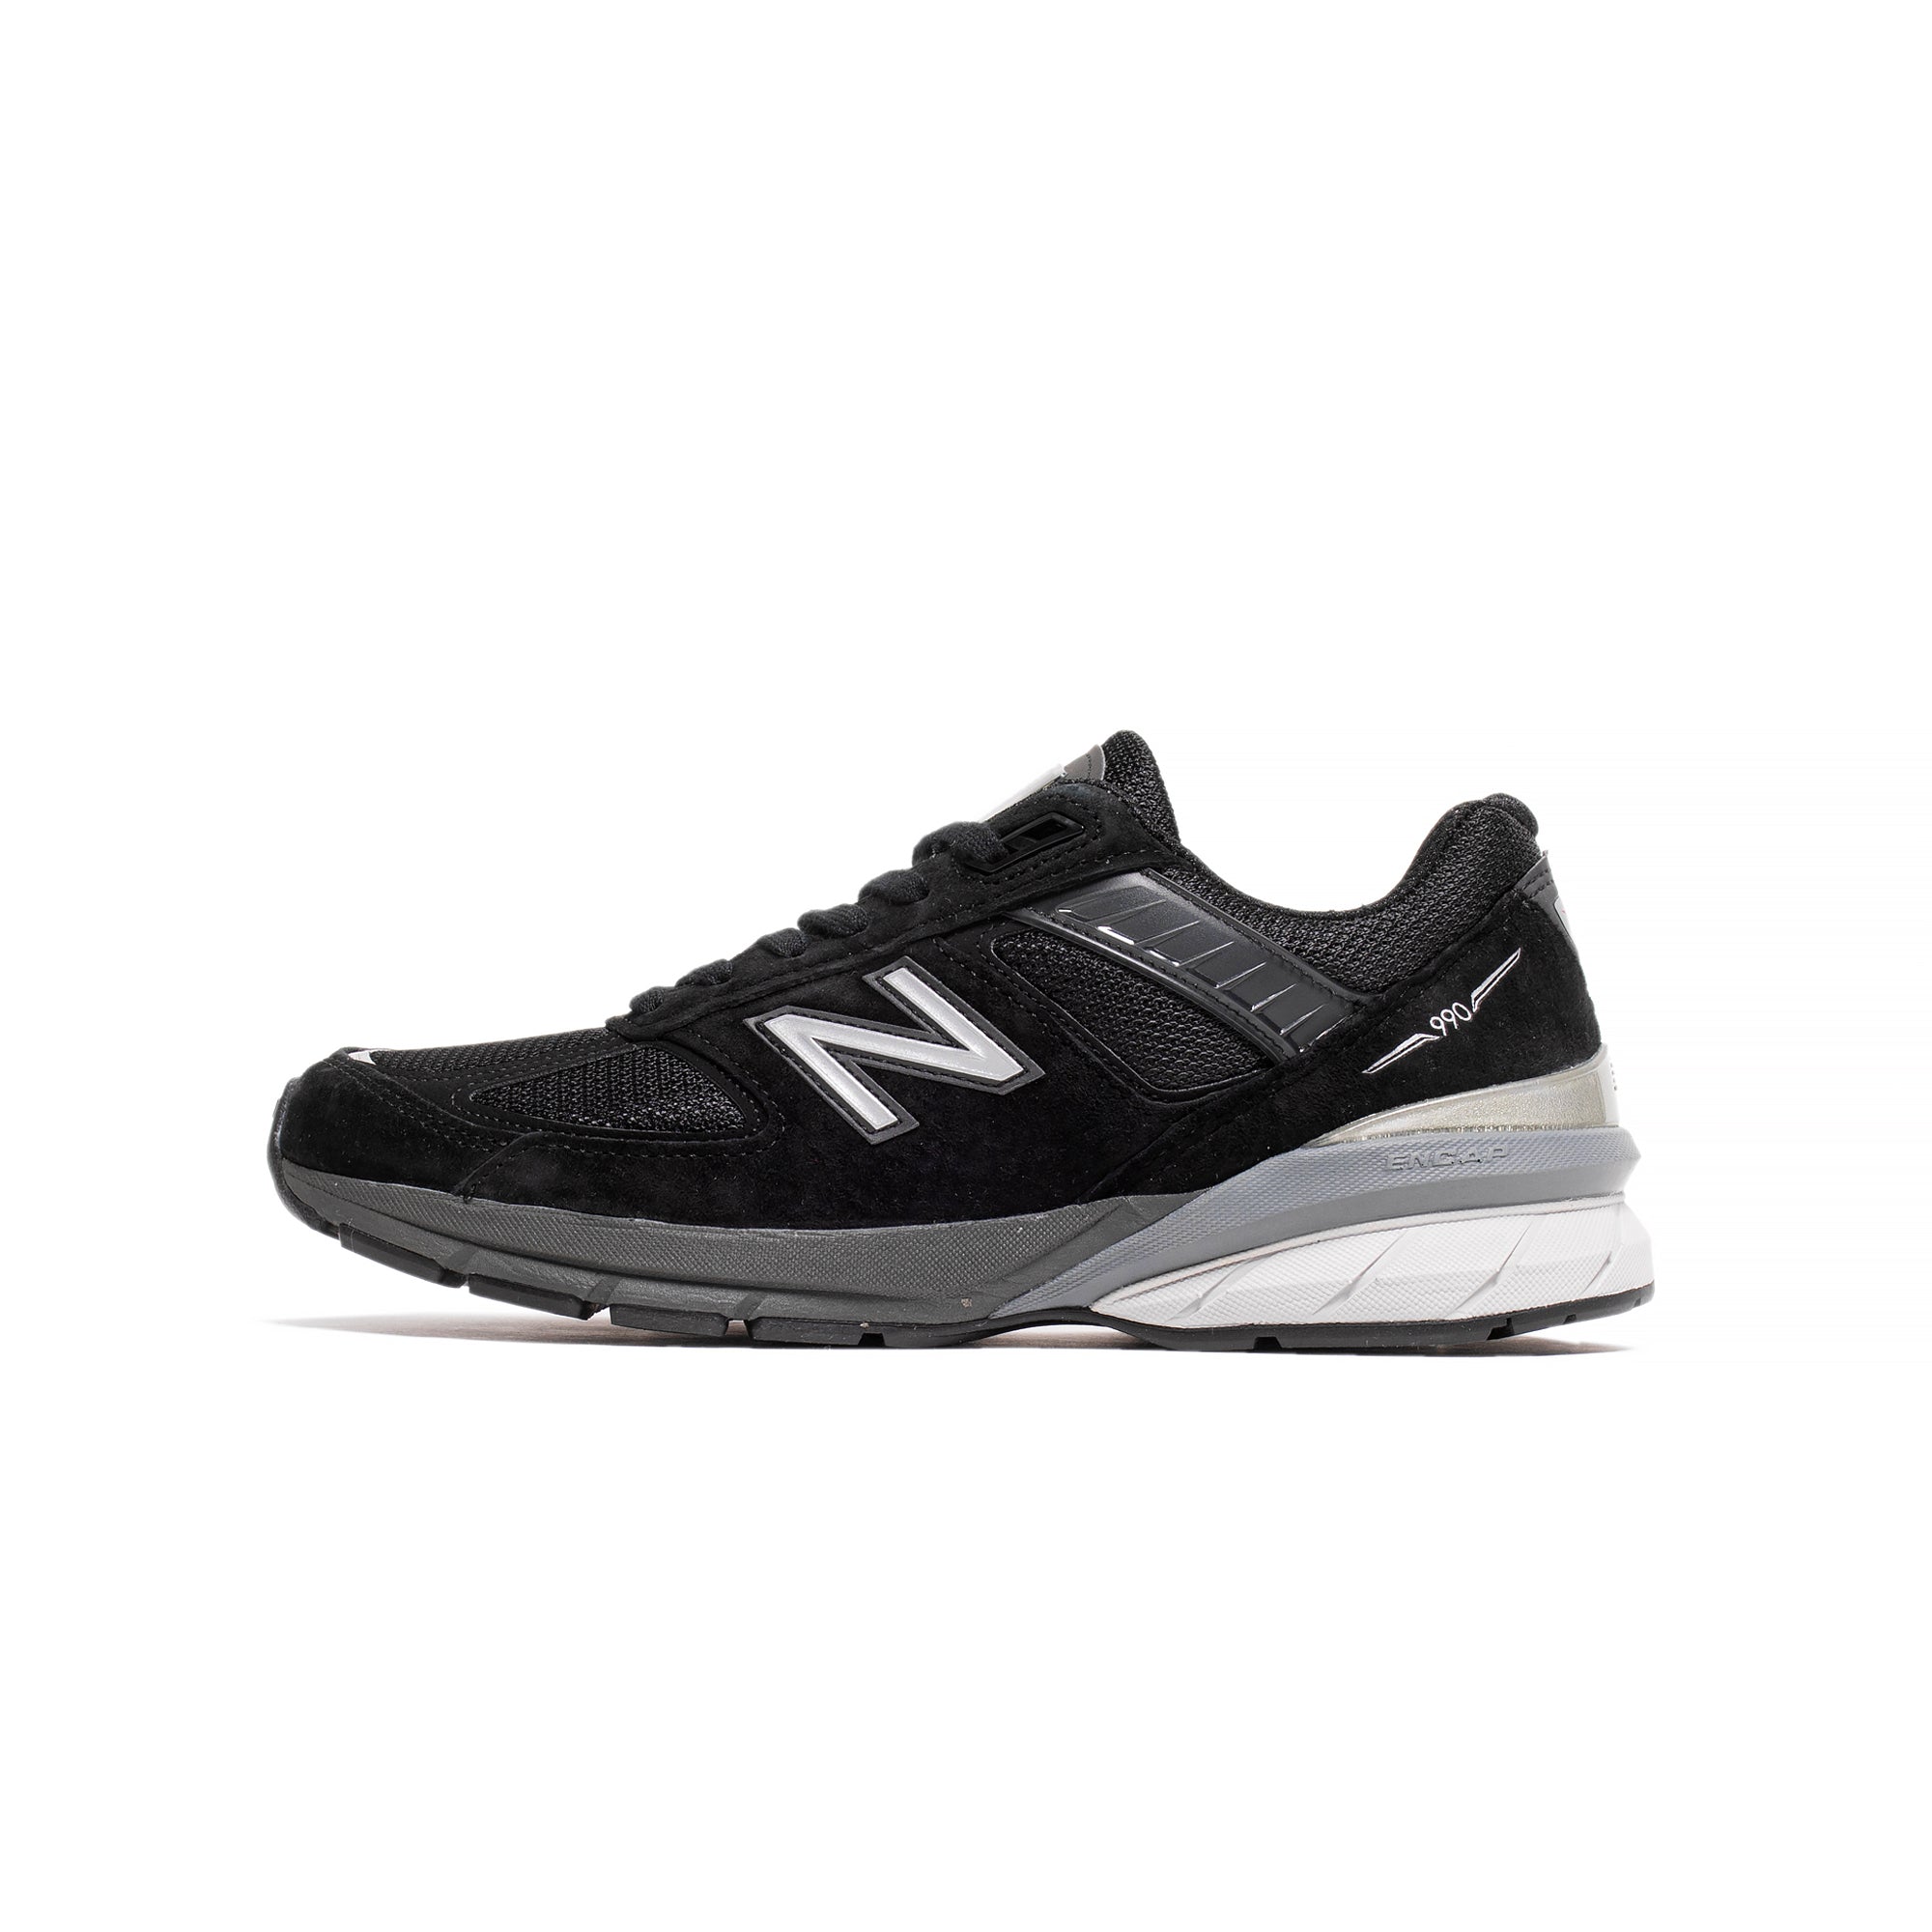 New Balance Mens Made in USA 990v5 Shoes